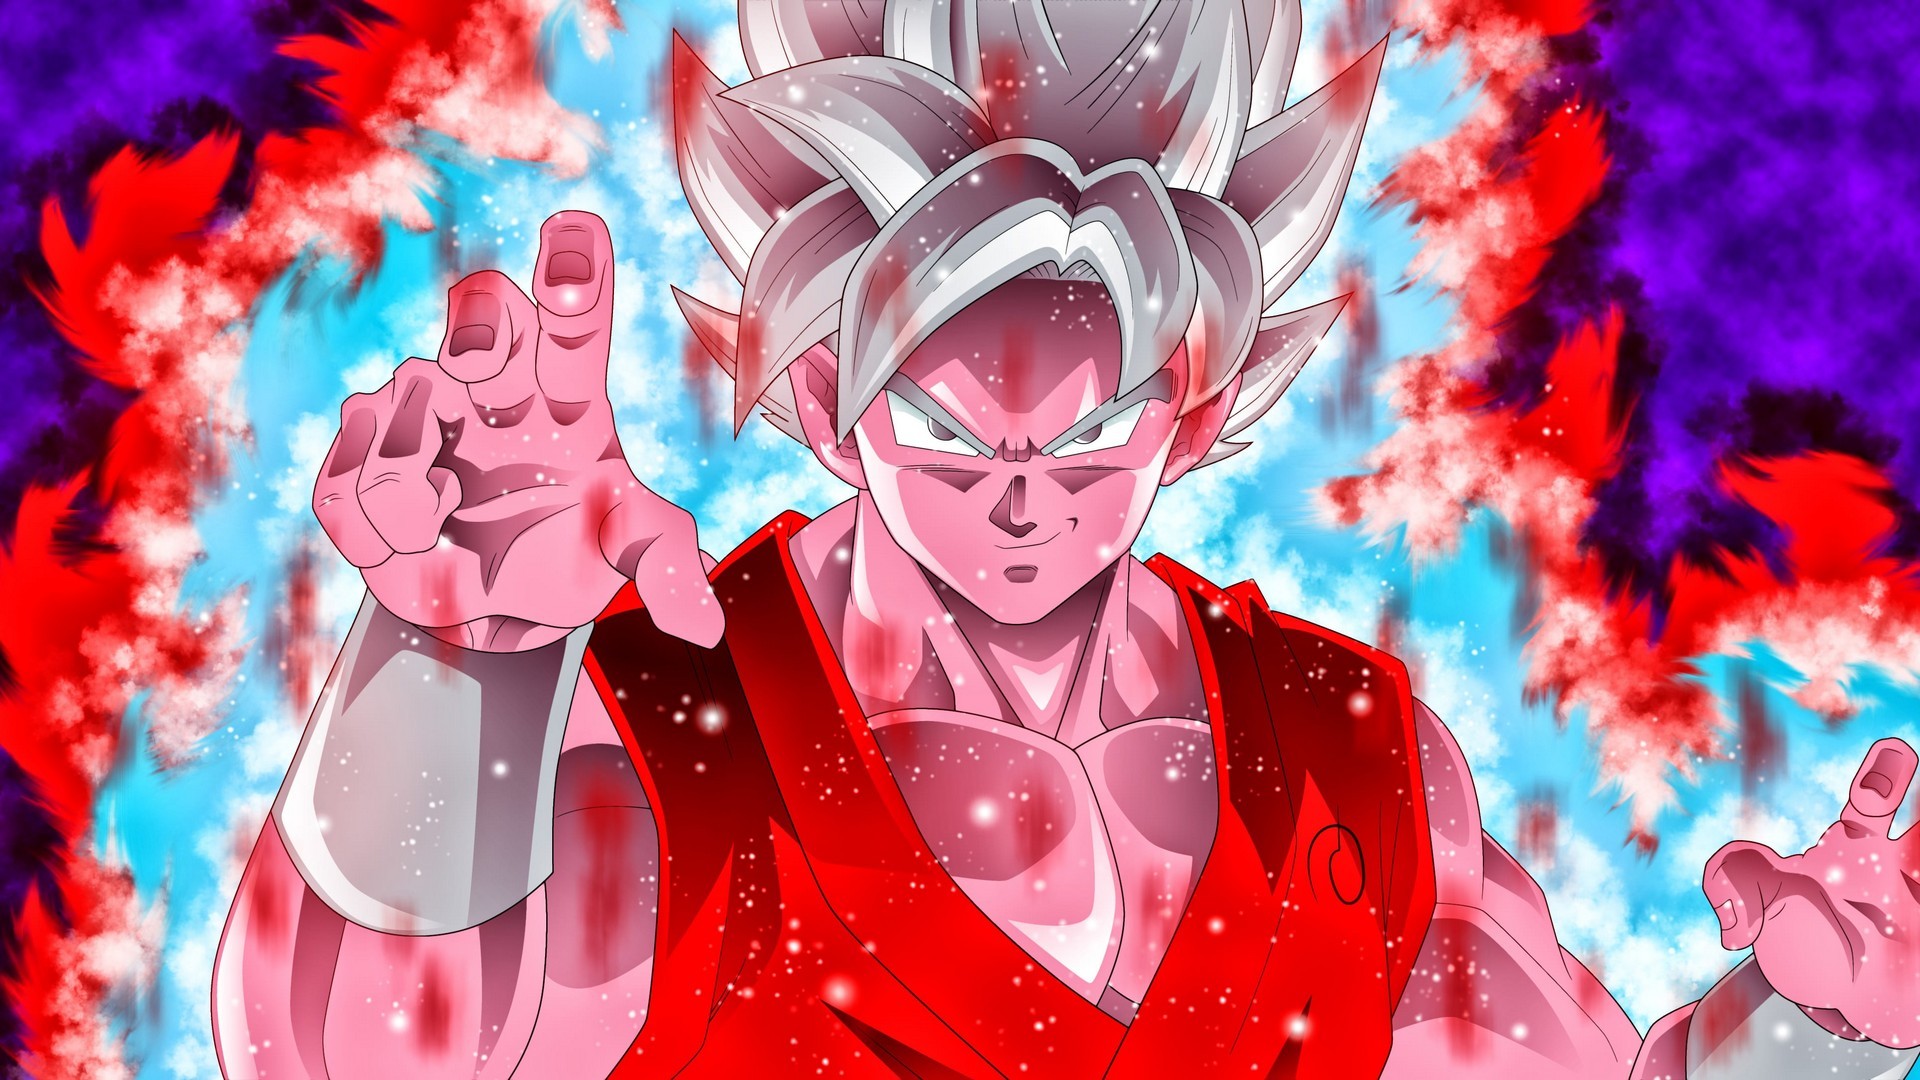 Goku Super Saiyan Desktop Wallpaper with resolution 1920X1080 pixel. You can use this wallpaper as background for your desktop Computer Screensavers, Android or iPhone smartphones